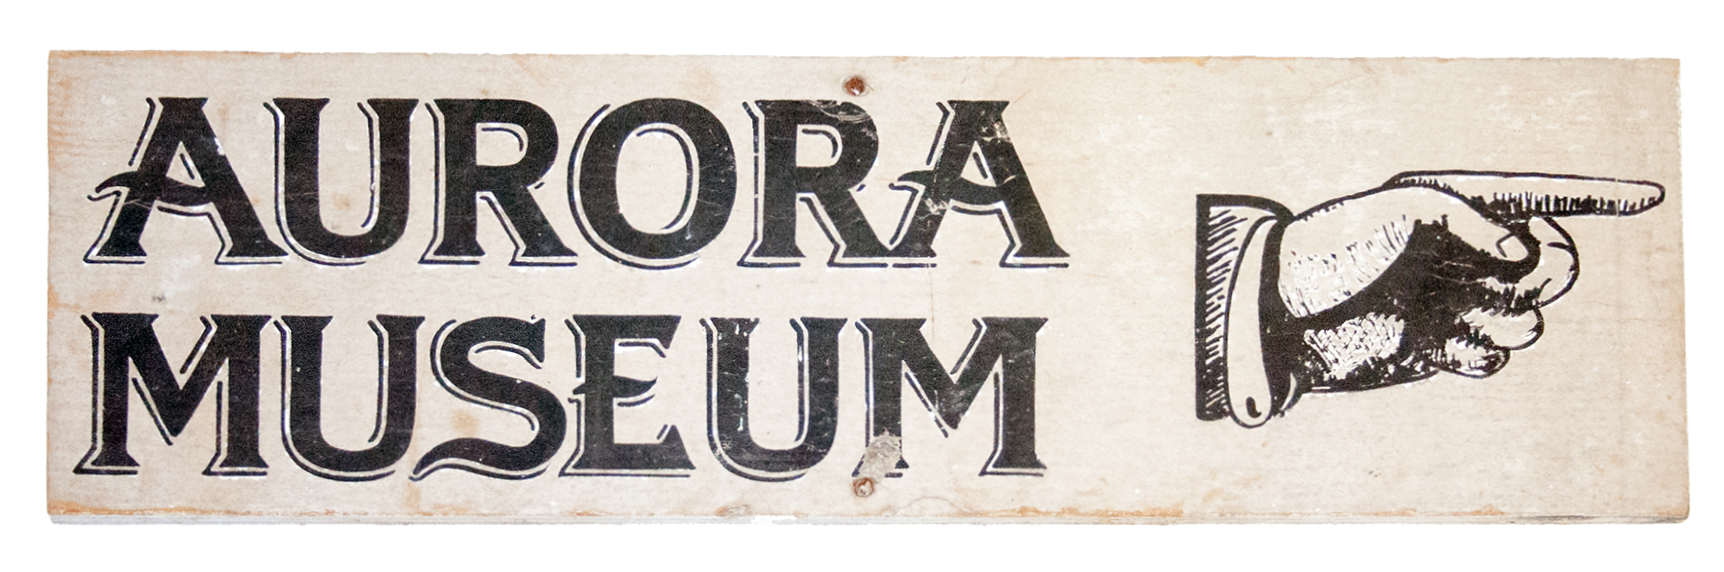 A wooden sign for the Aurora Museum, with a painted pointing hand.